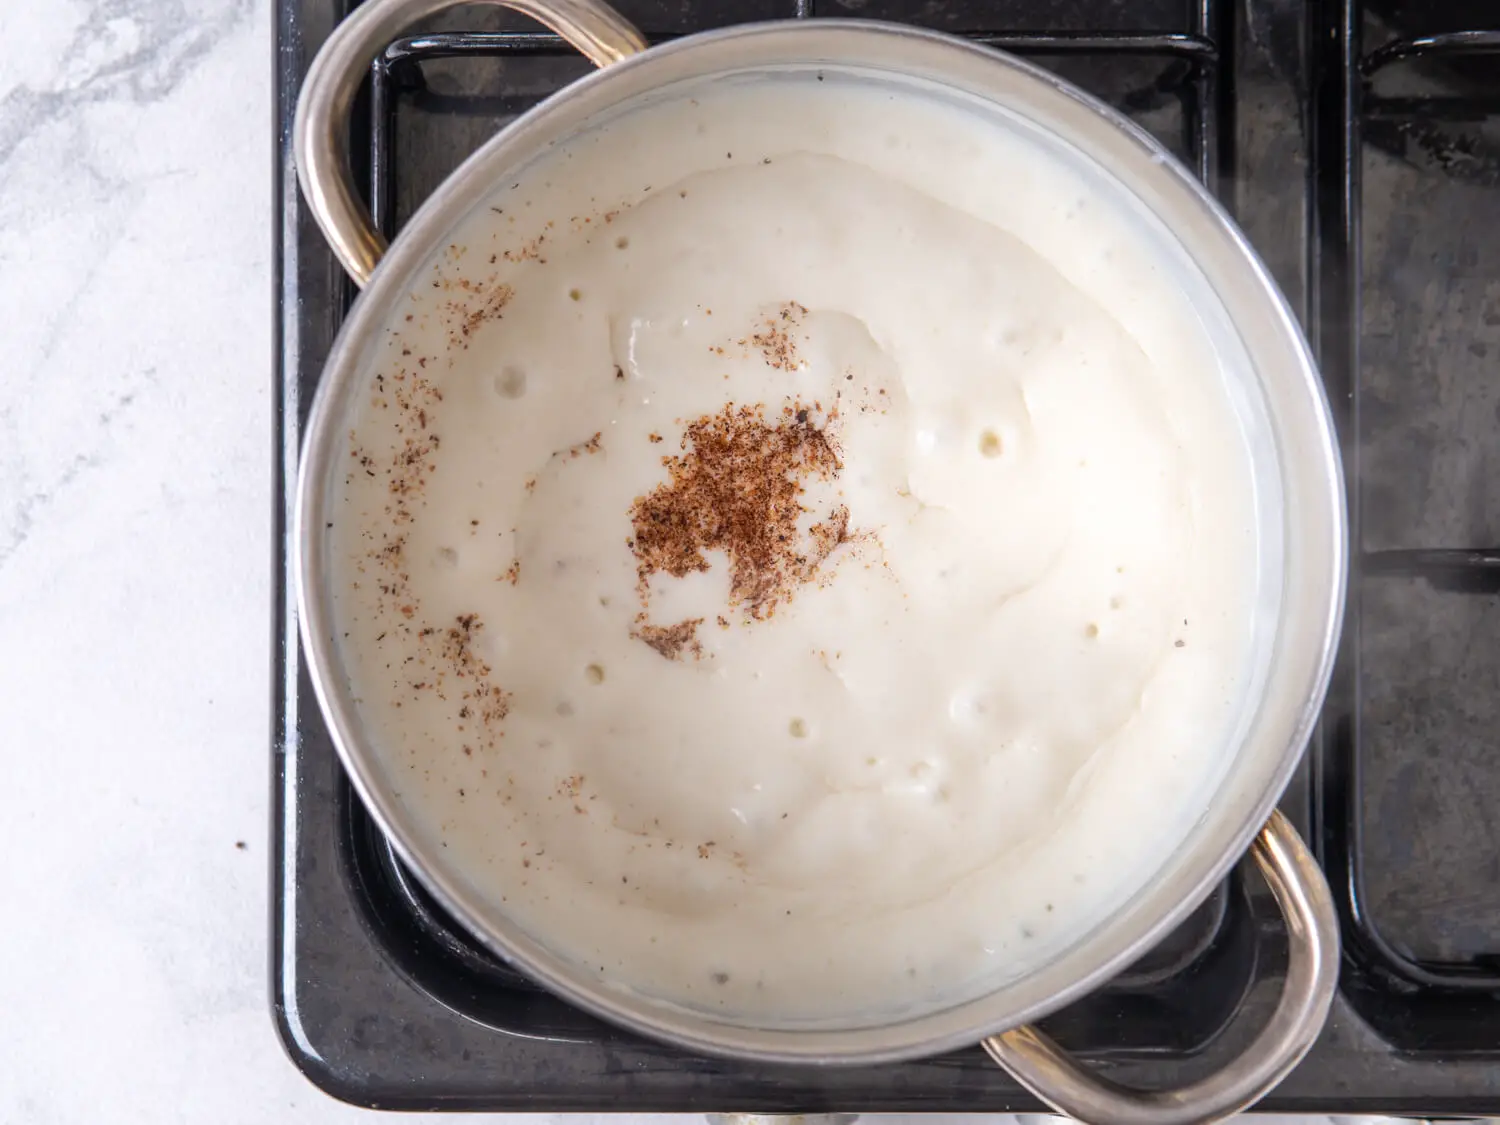 Raise the heat to medium-high and whisk in the milk gently until it has thickened and incorporated.